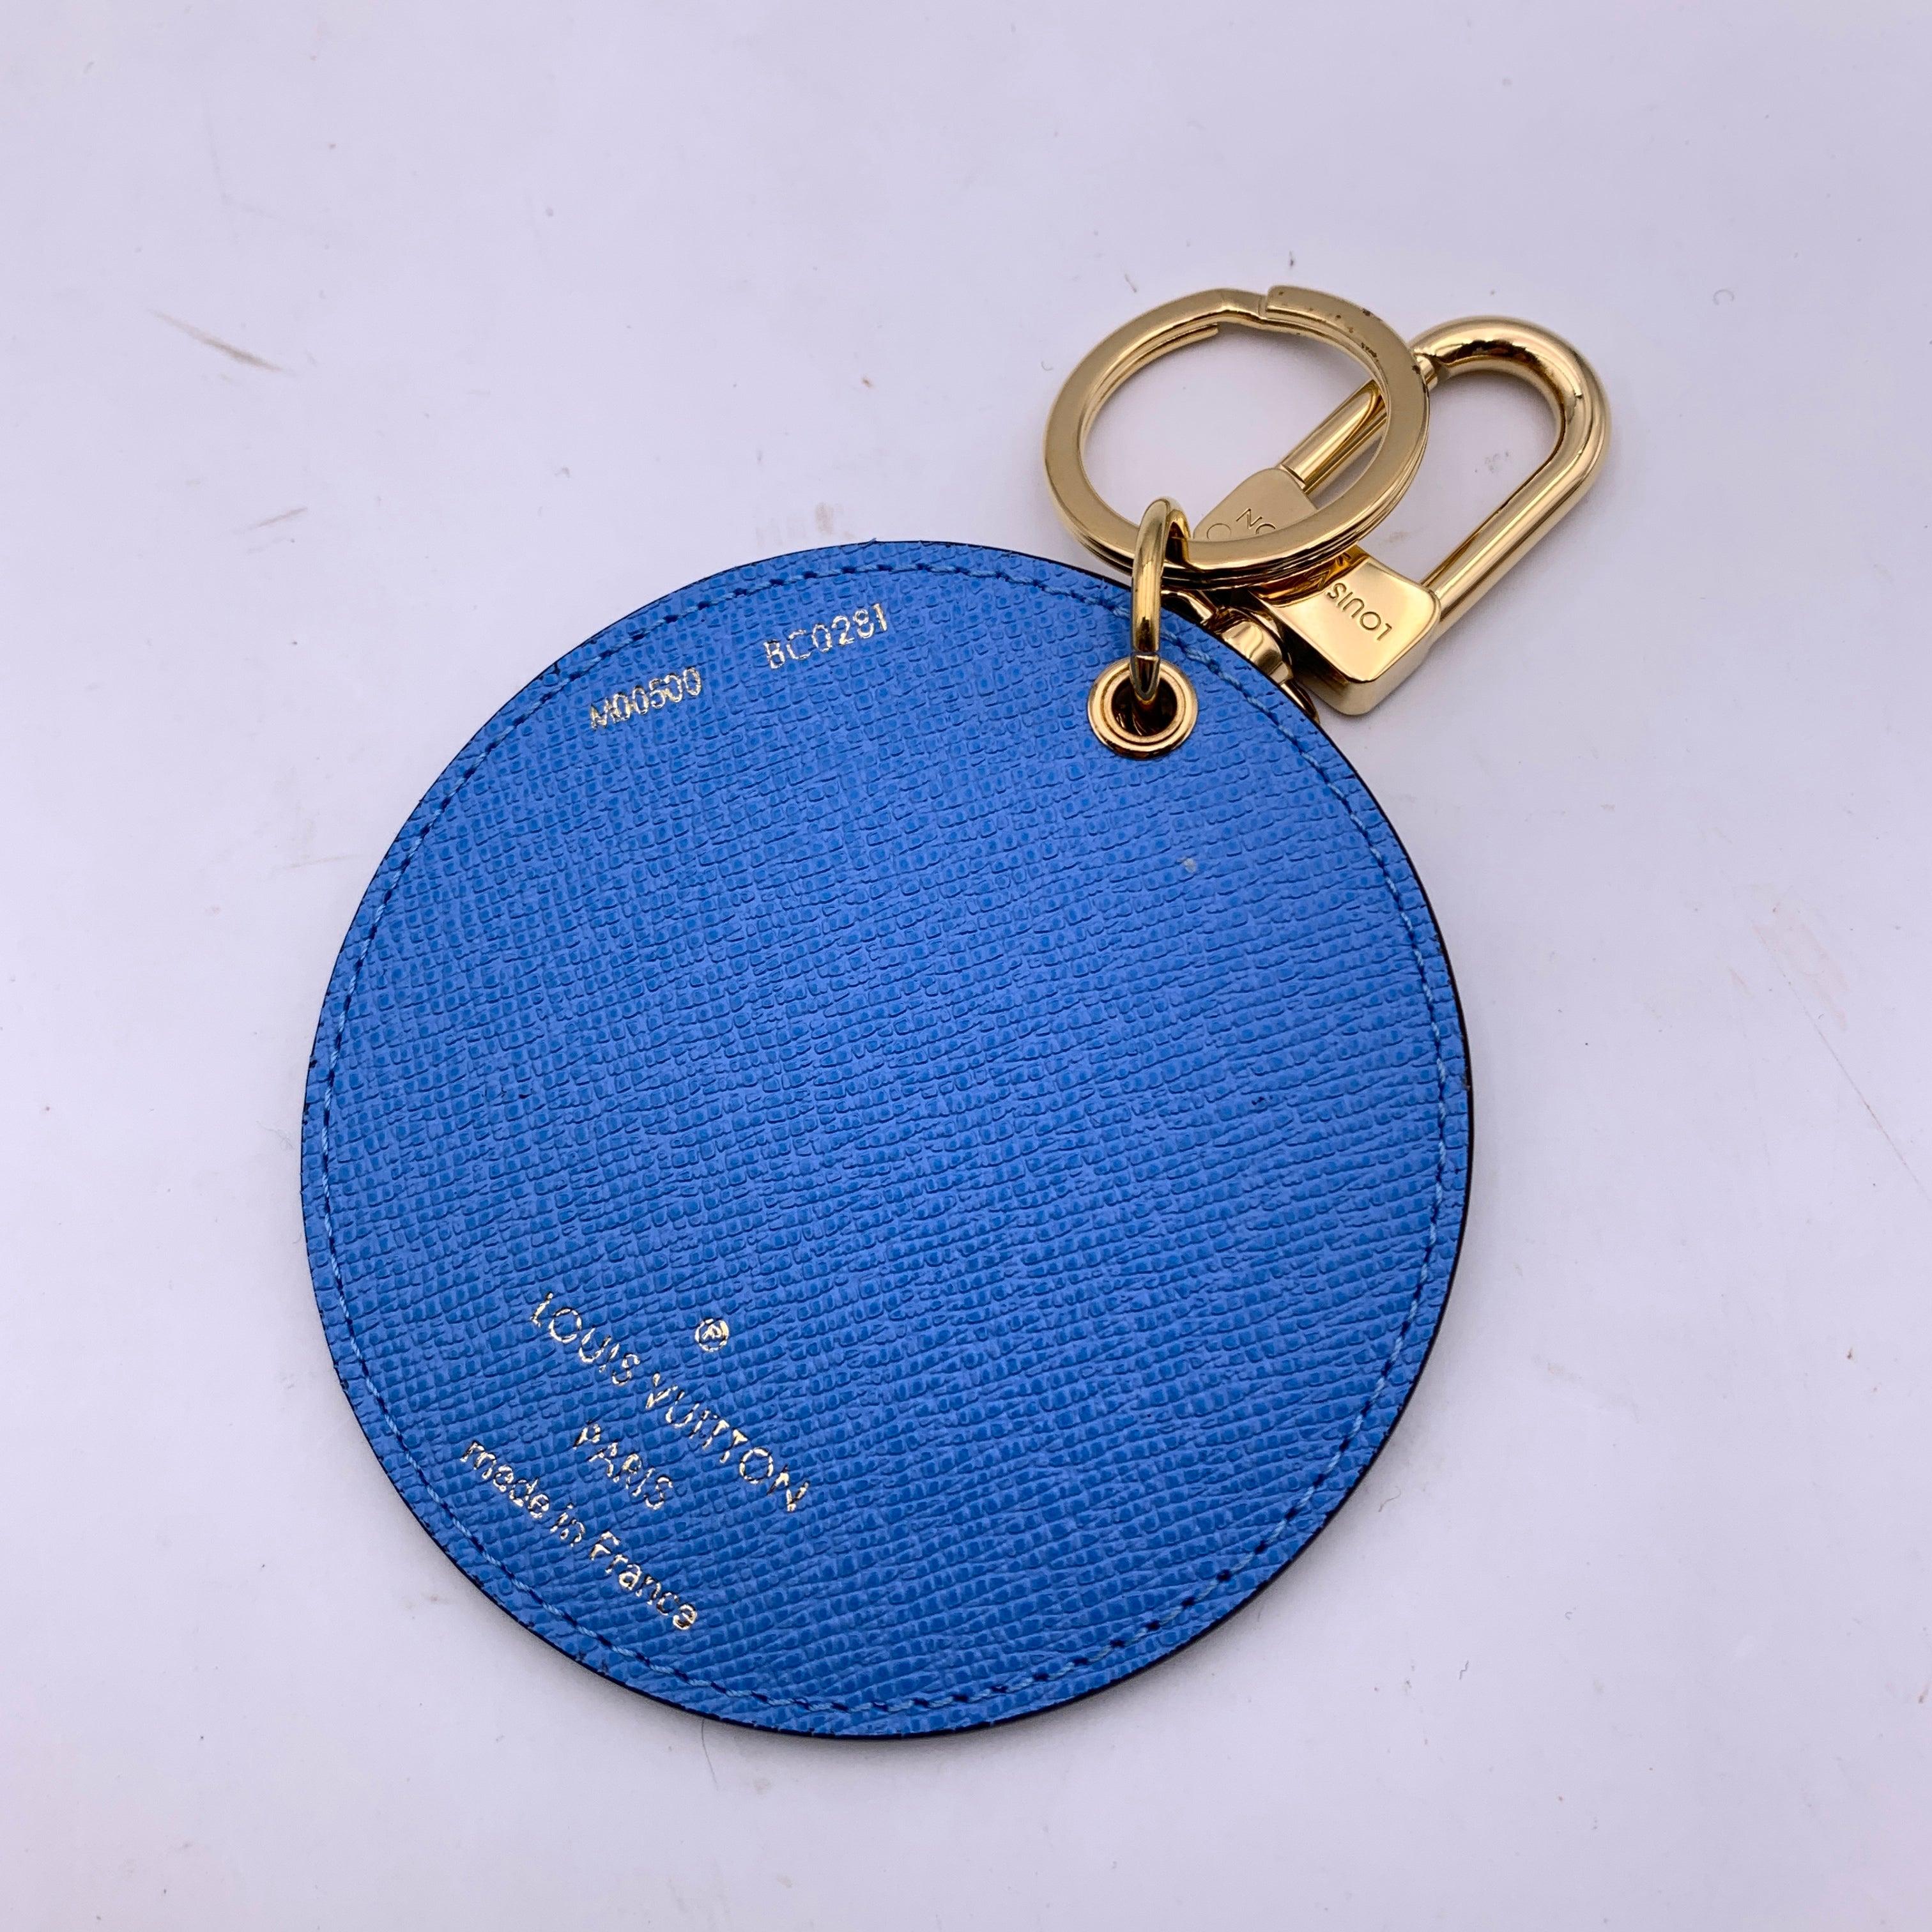 Louis Vuitton Monogram Illustré China Wall Bag Charm Key Ring M00500 In Excellent Condition For Sale In Rome, Rome